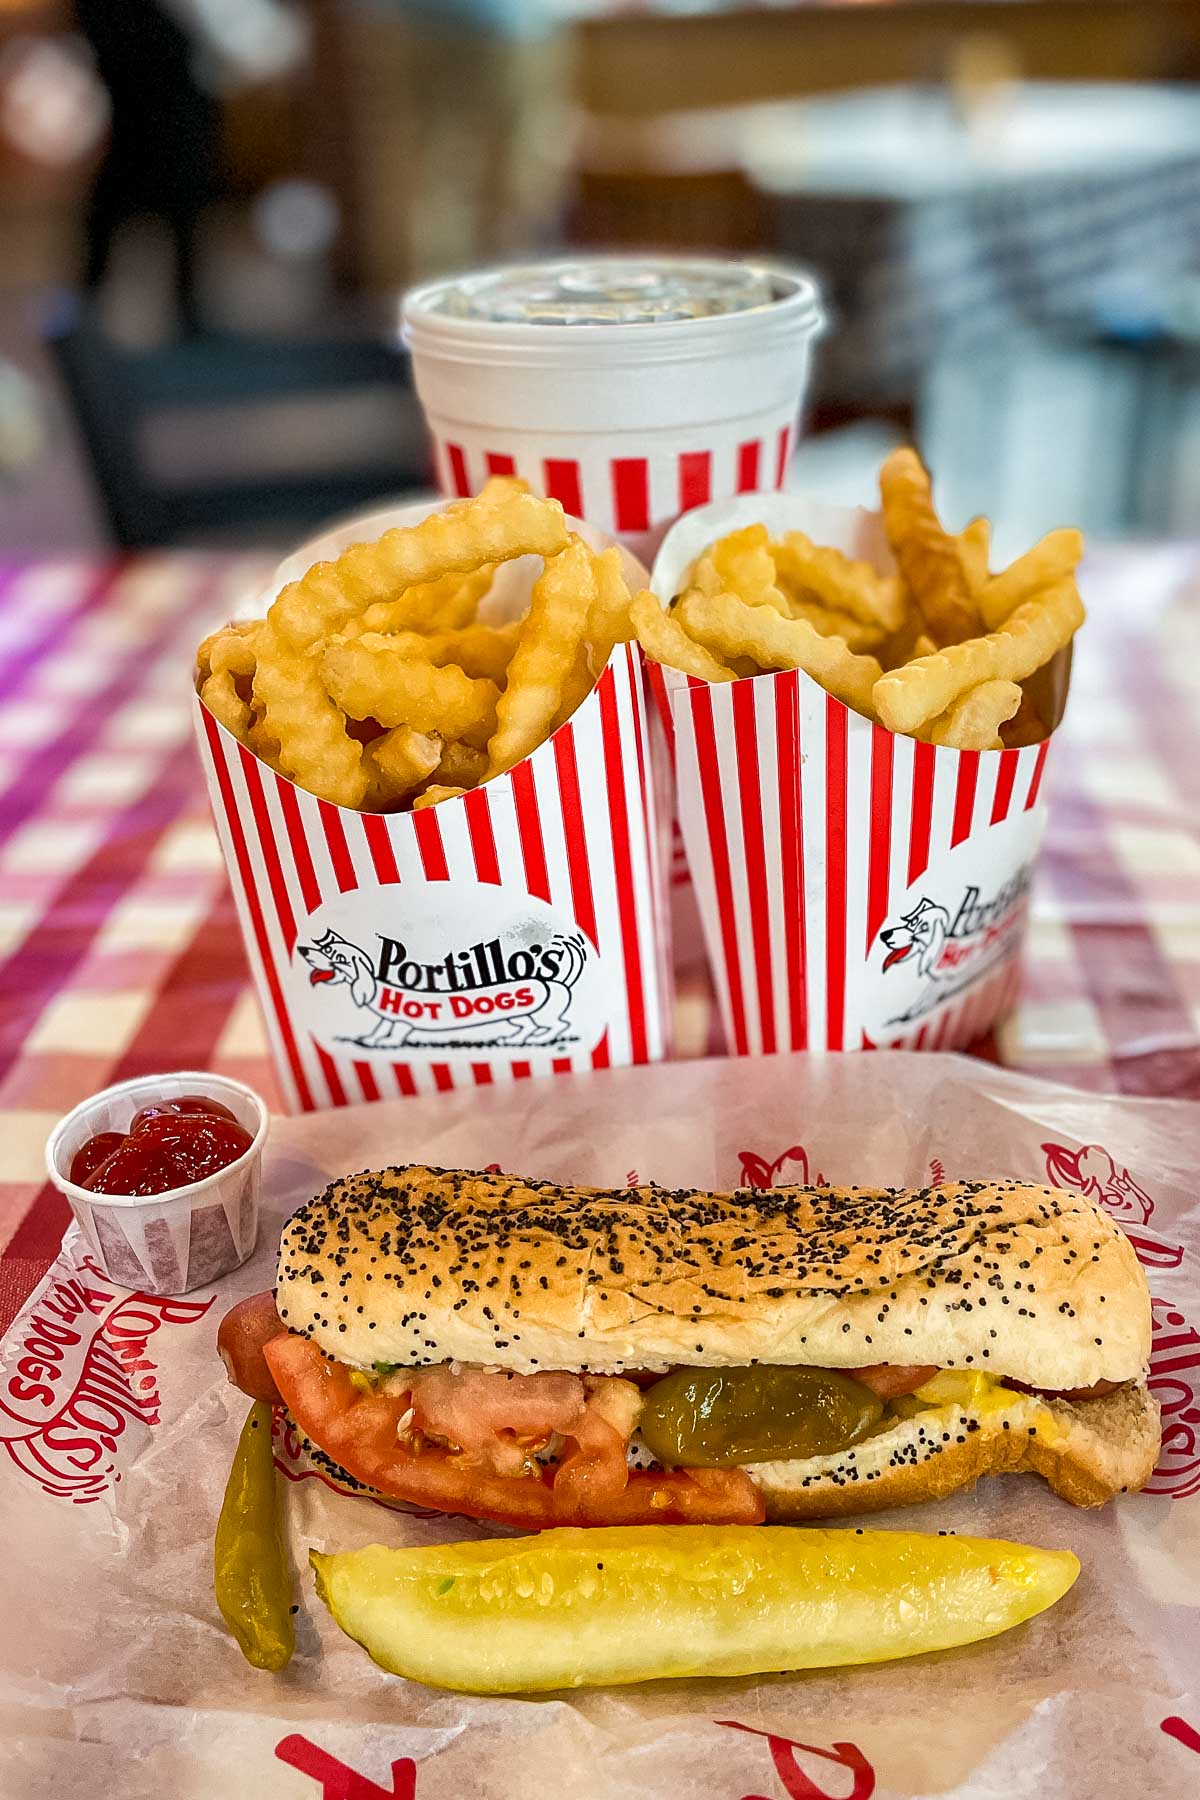 Hot dog and fries at Portillo’s Hot Dogs in Chicago